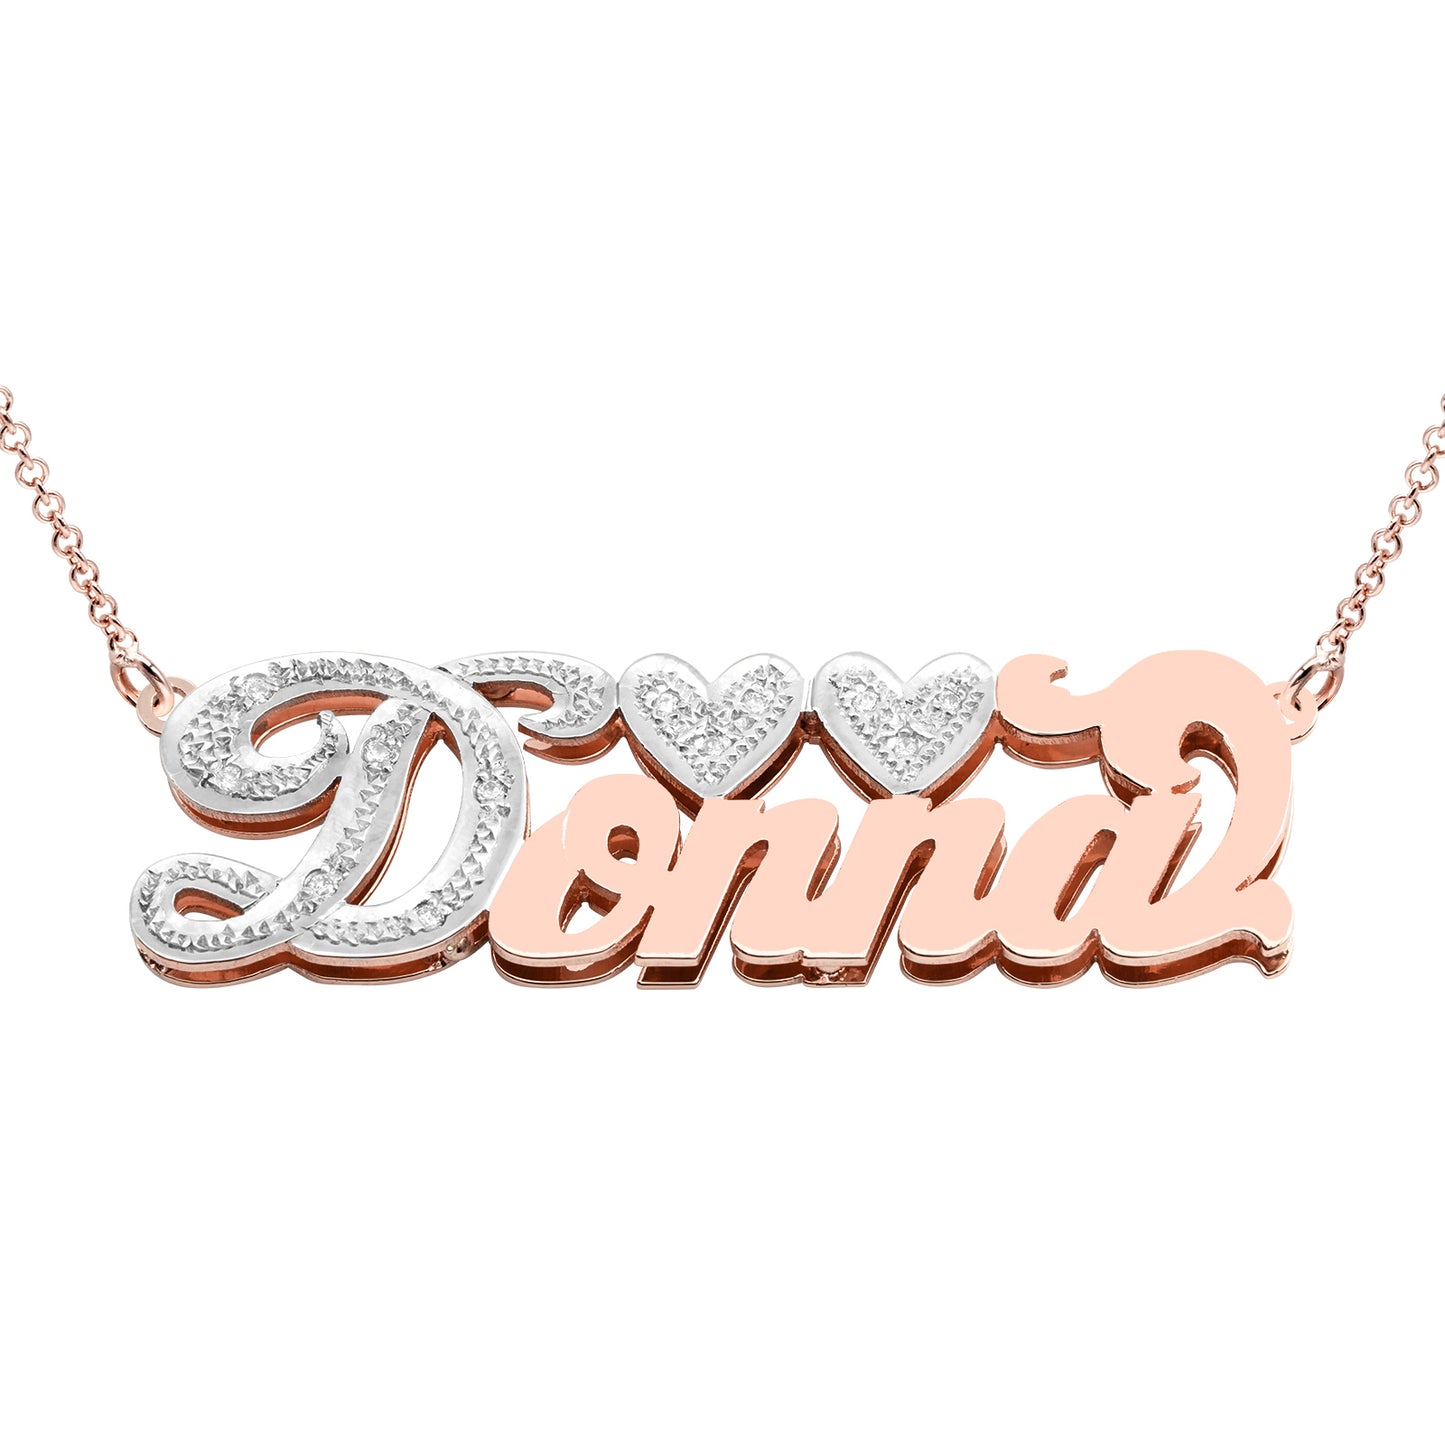 Personalized 14kt. Gold and Diamond Initialed Name Necklace | Double Heart